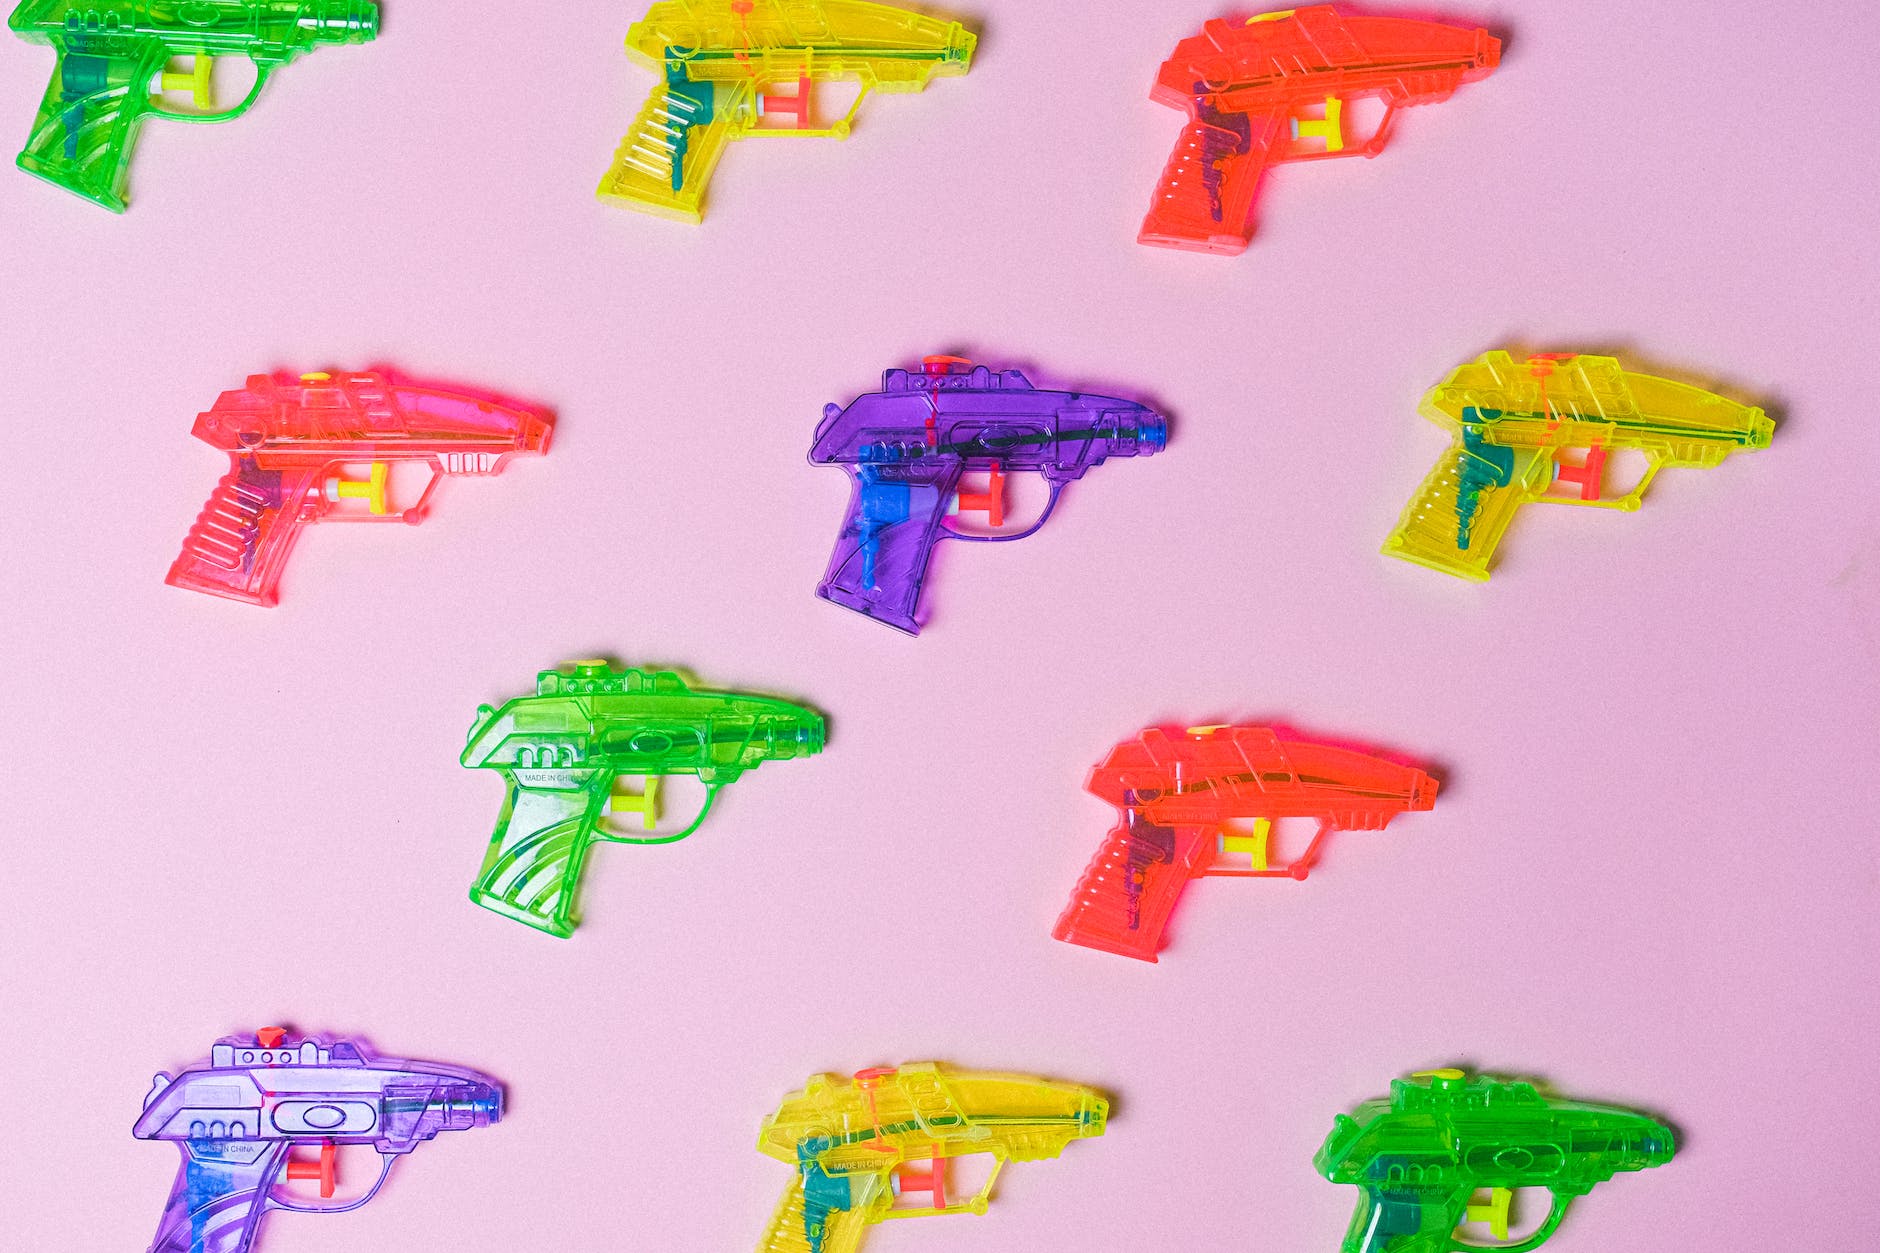 assortment of colorful guns for game